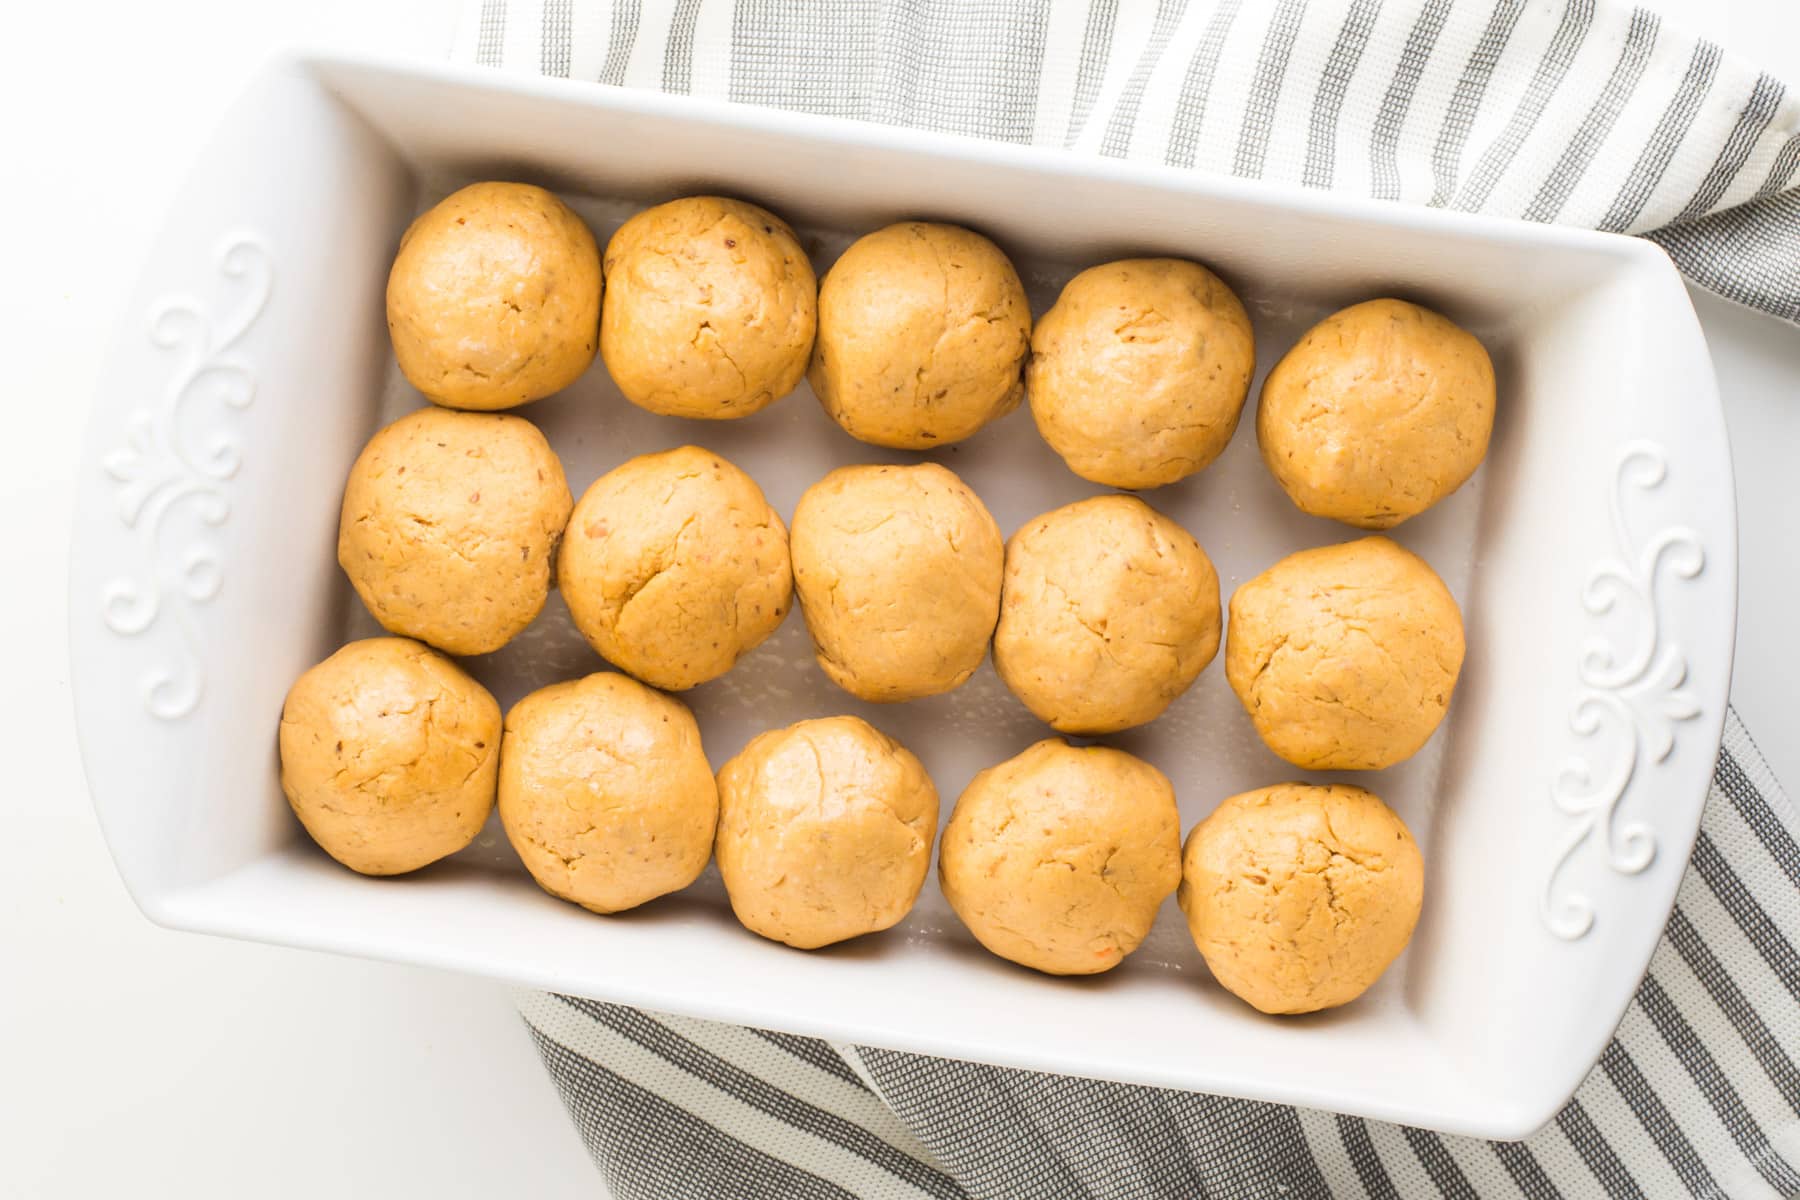 These vegan Sweet Potato Dinner Rolls require some time for rising.